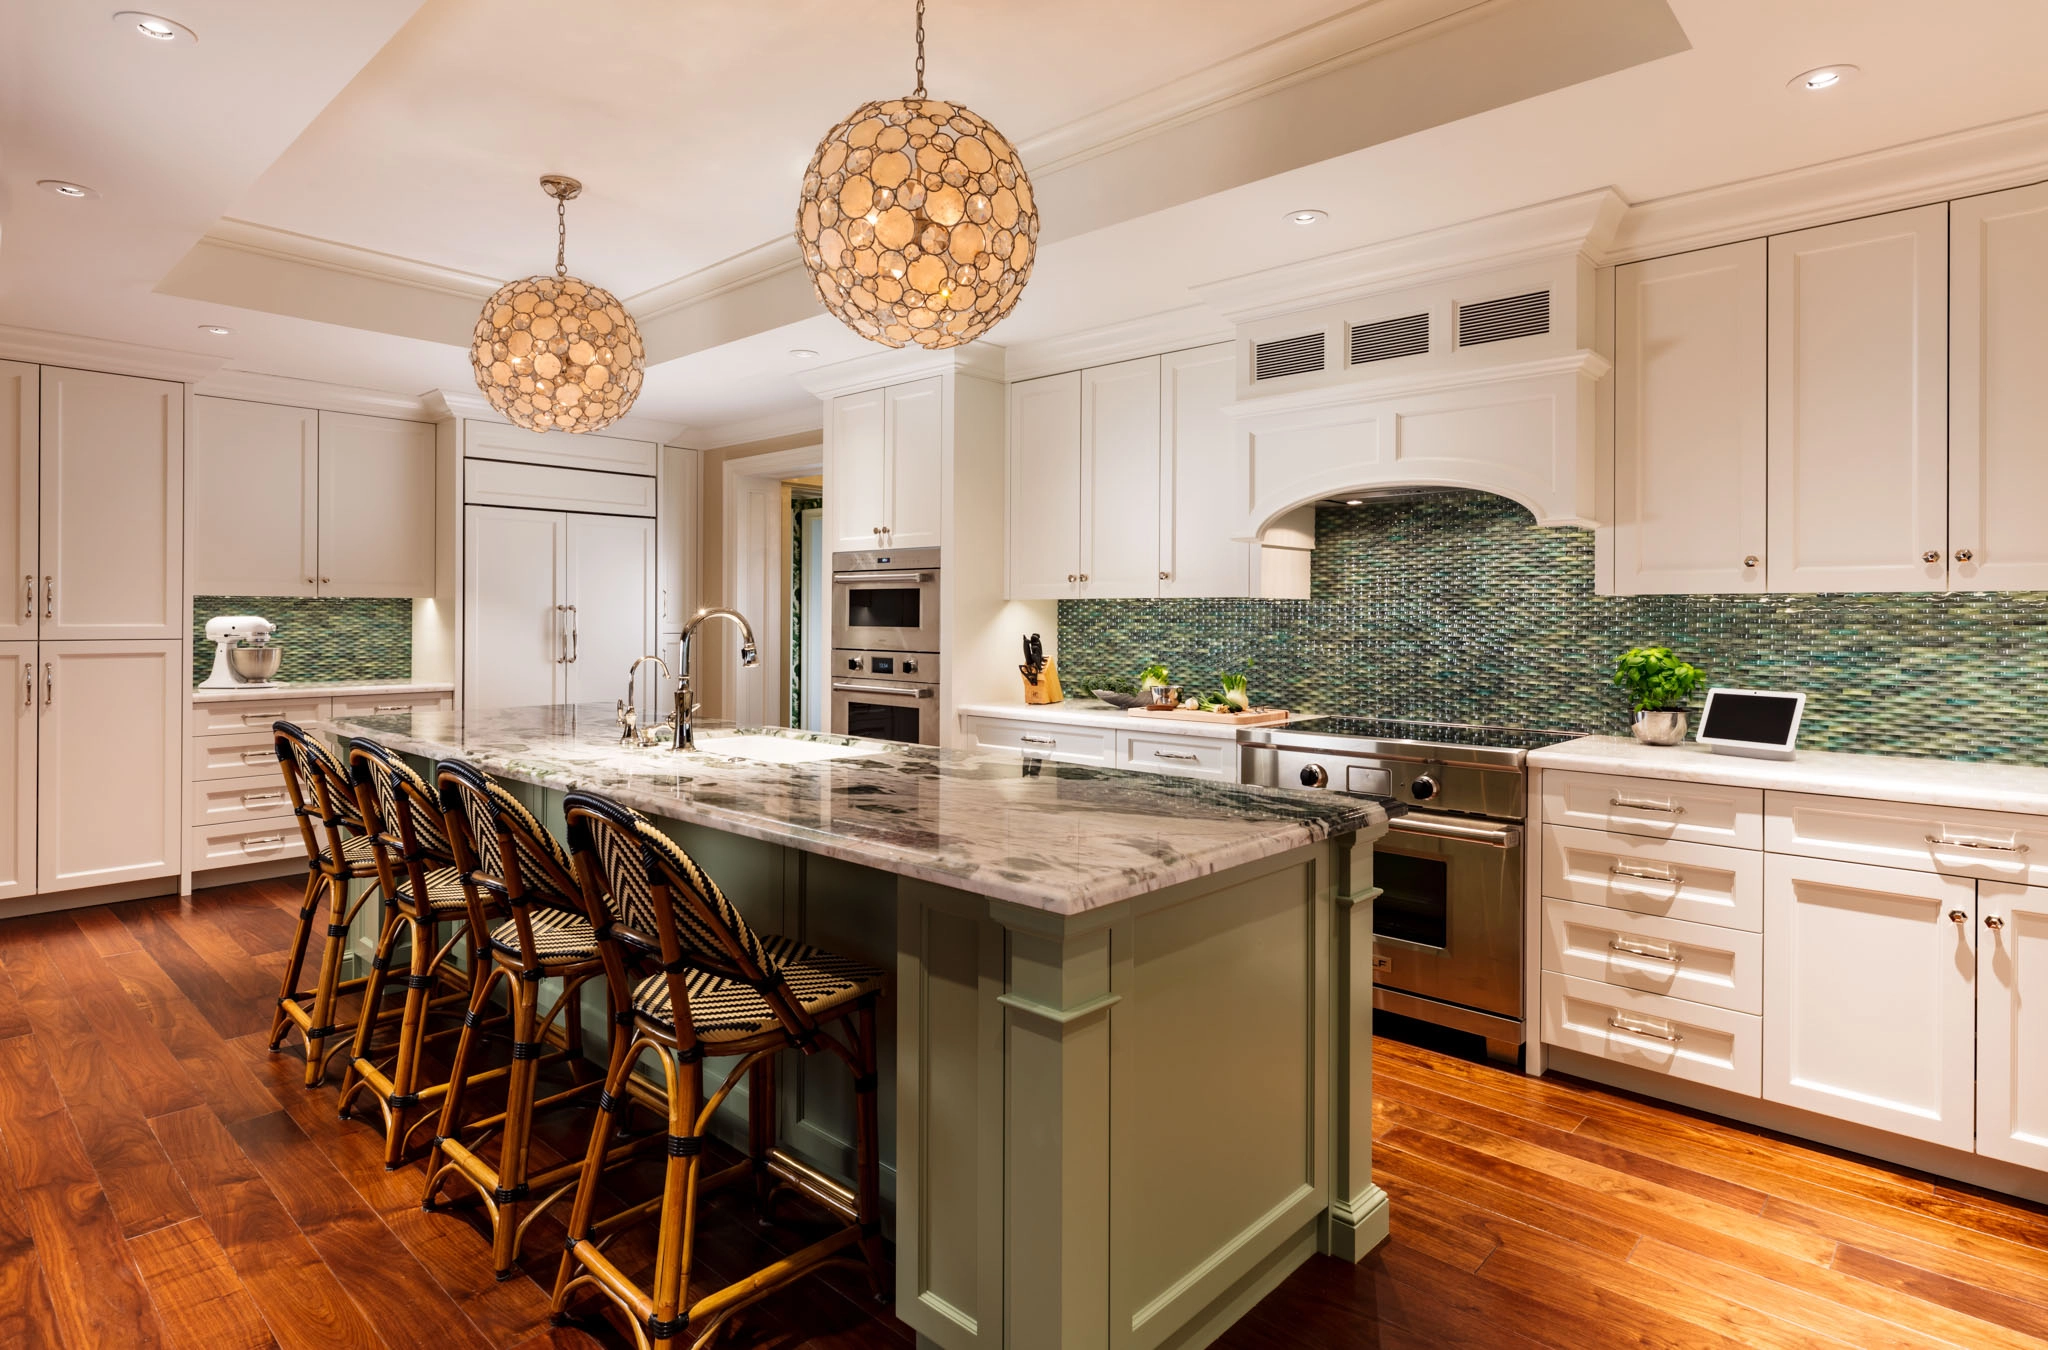 Stunning Kitchens with multi-colored green tile backsplashes and off white cabinetry are our favorite. In the middle of the kitchen, there is a large olive green island with a marble countertop.